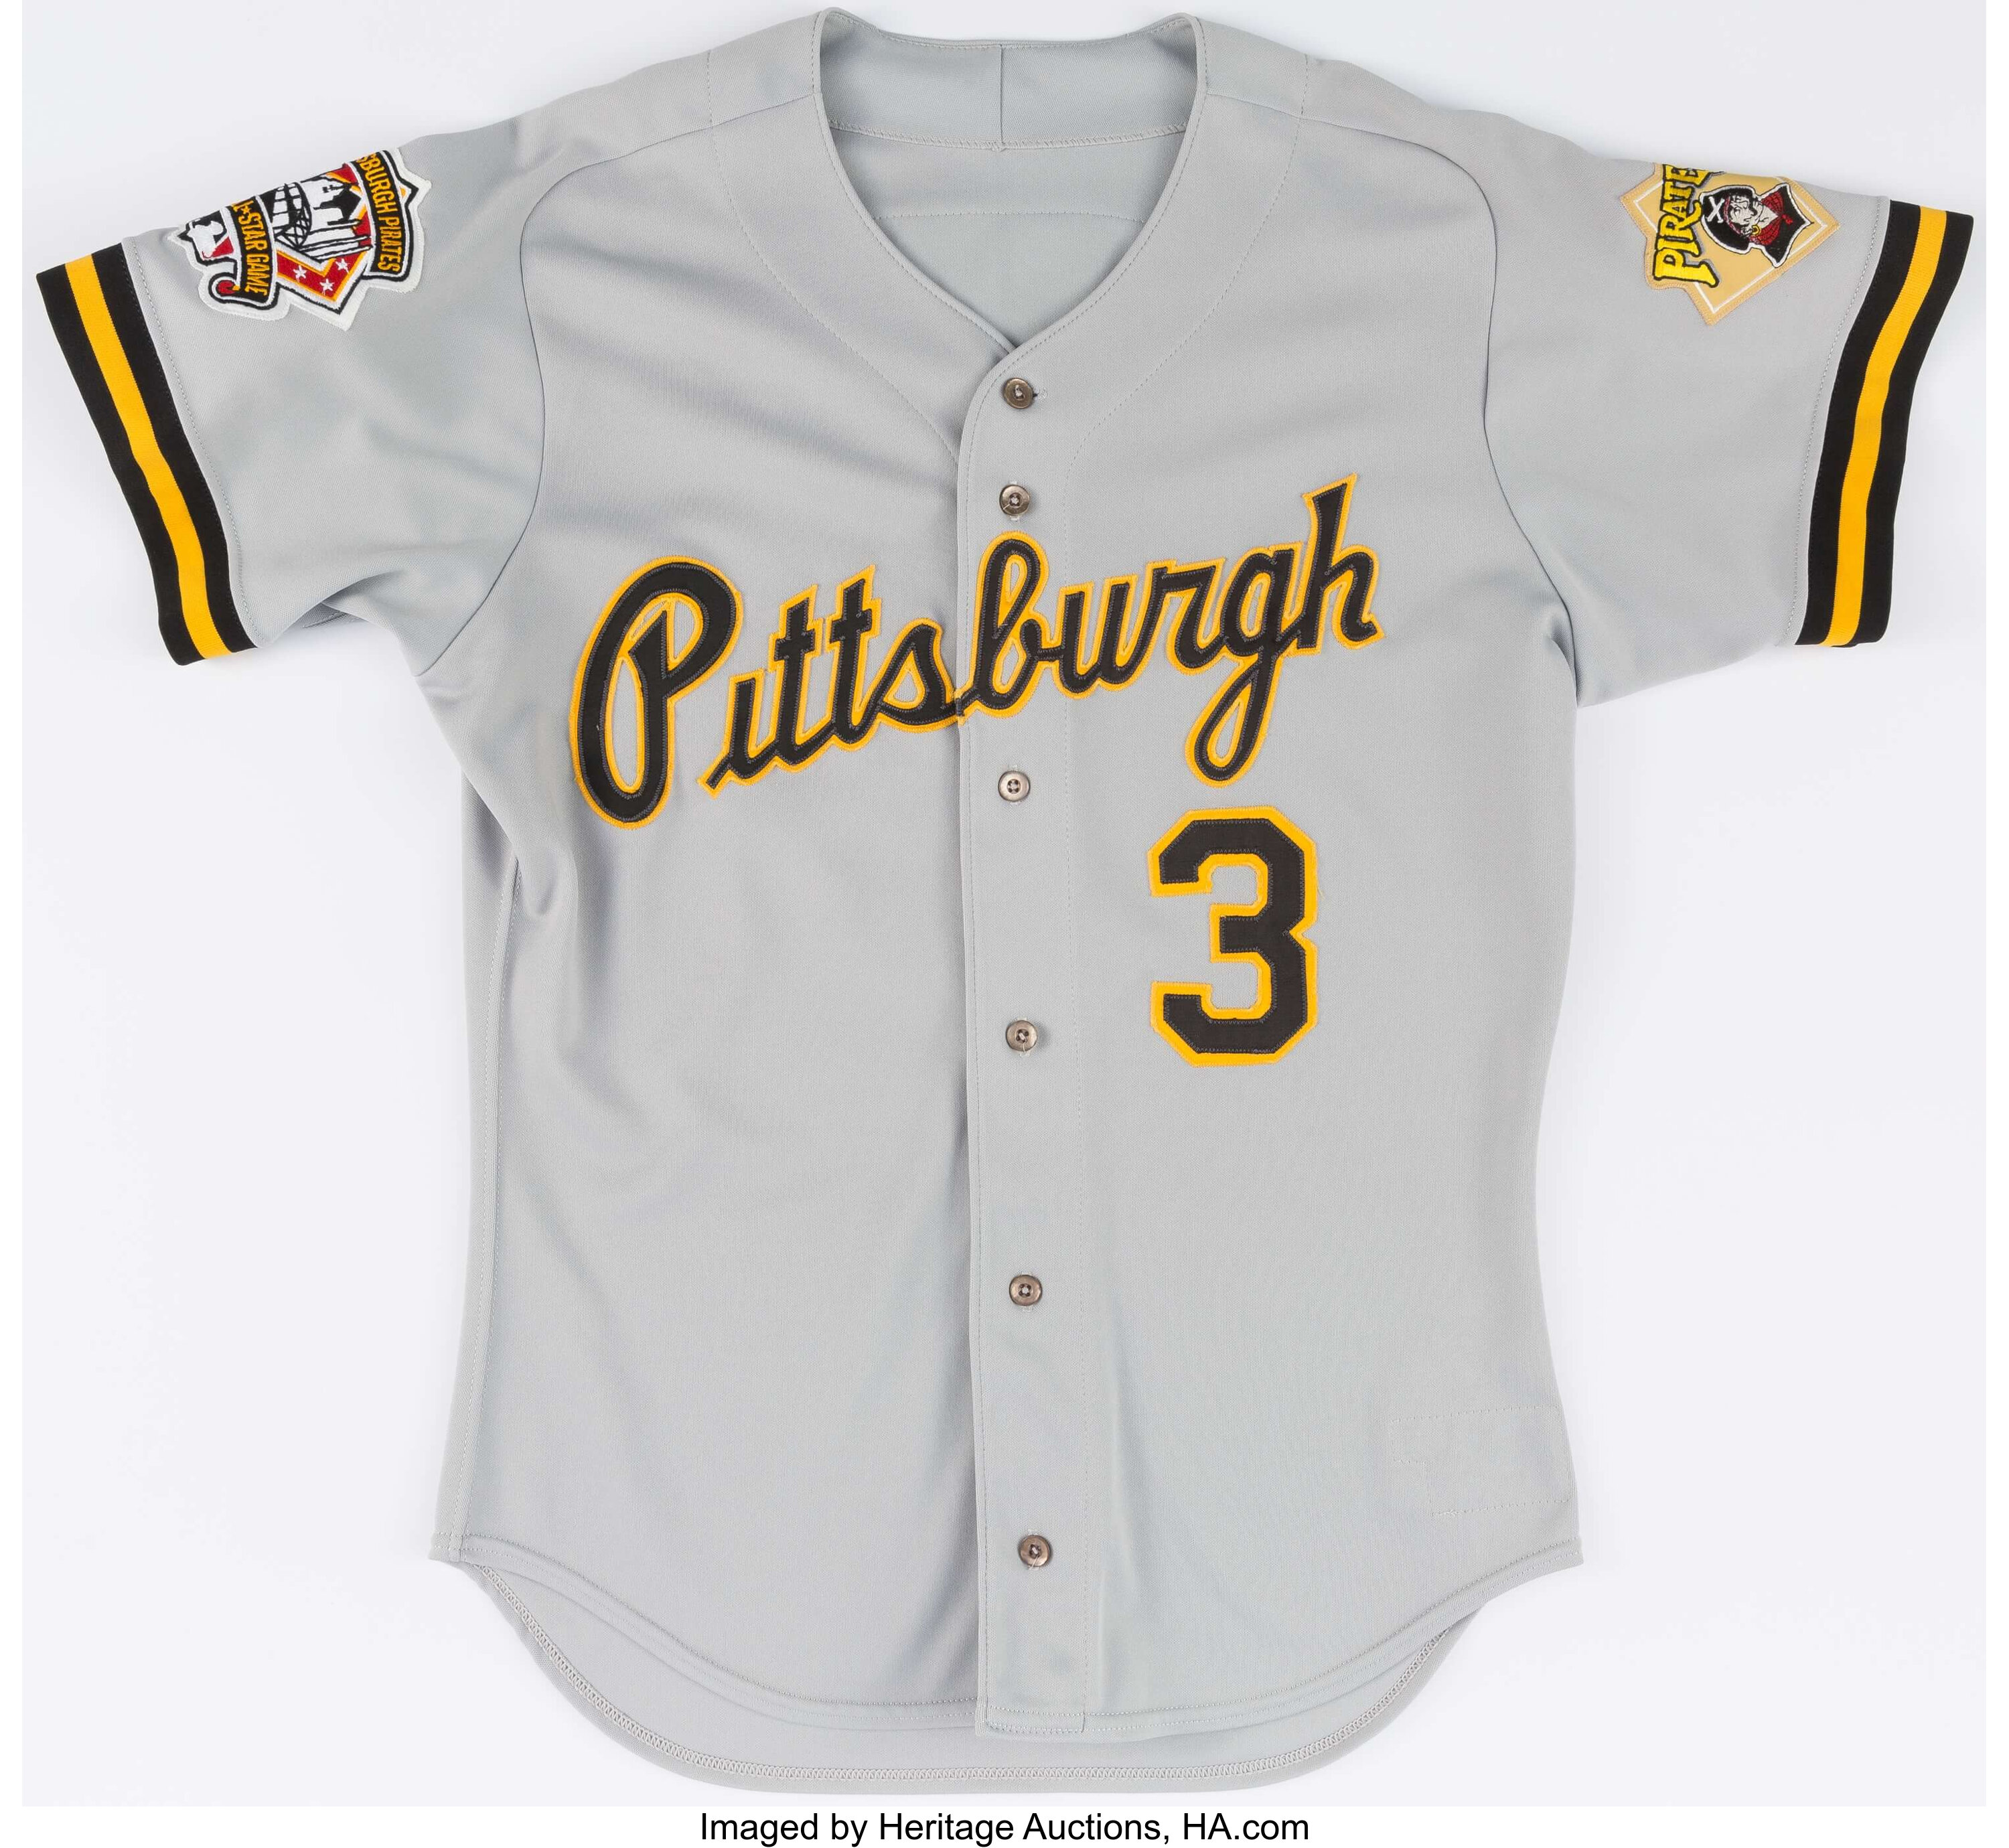 Vintage 90s Pittsburgh Pirates Baseball Jersey Authentic Sewn Game